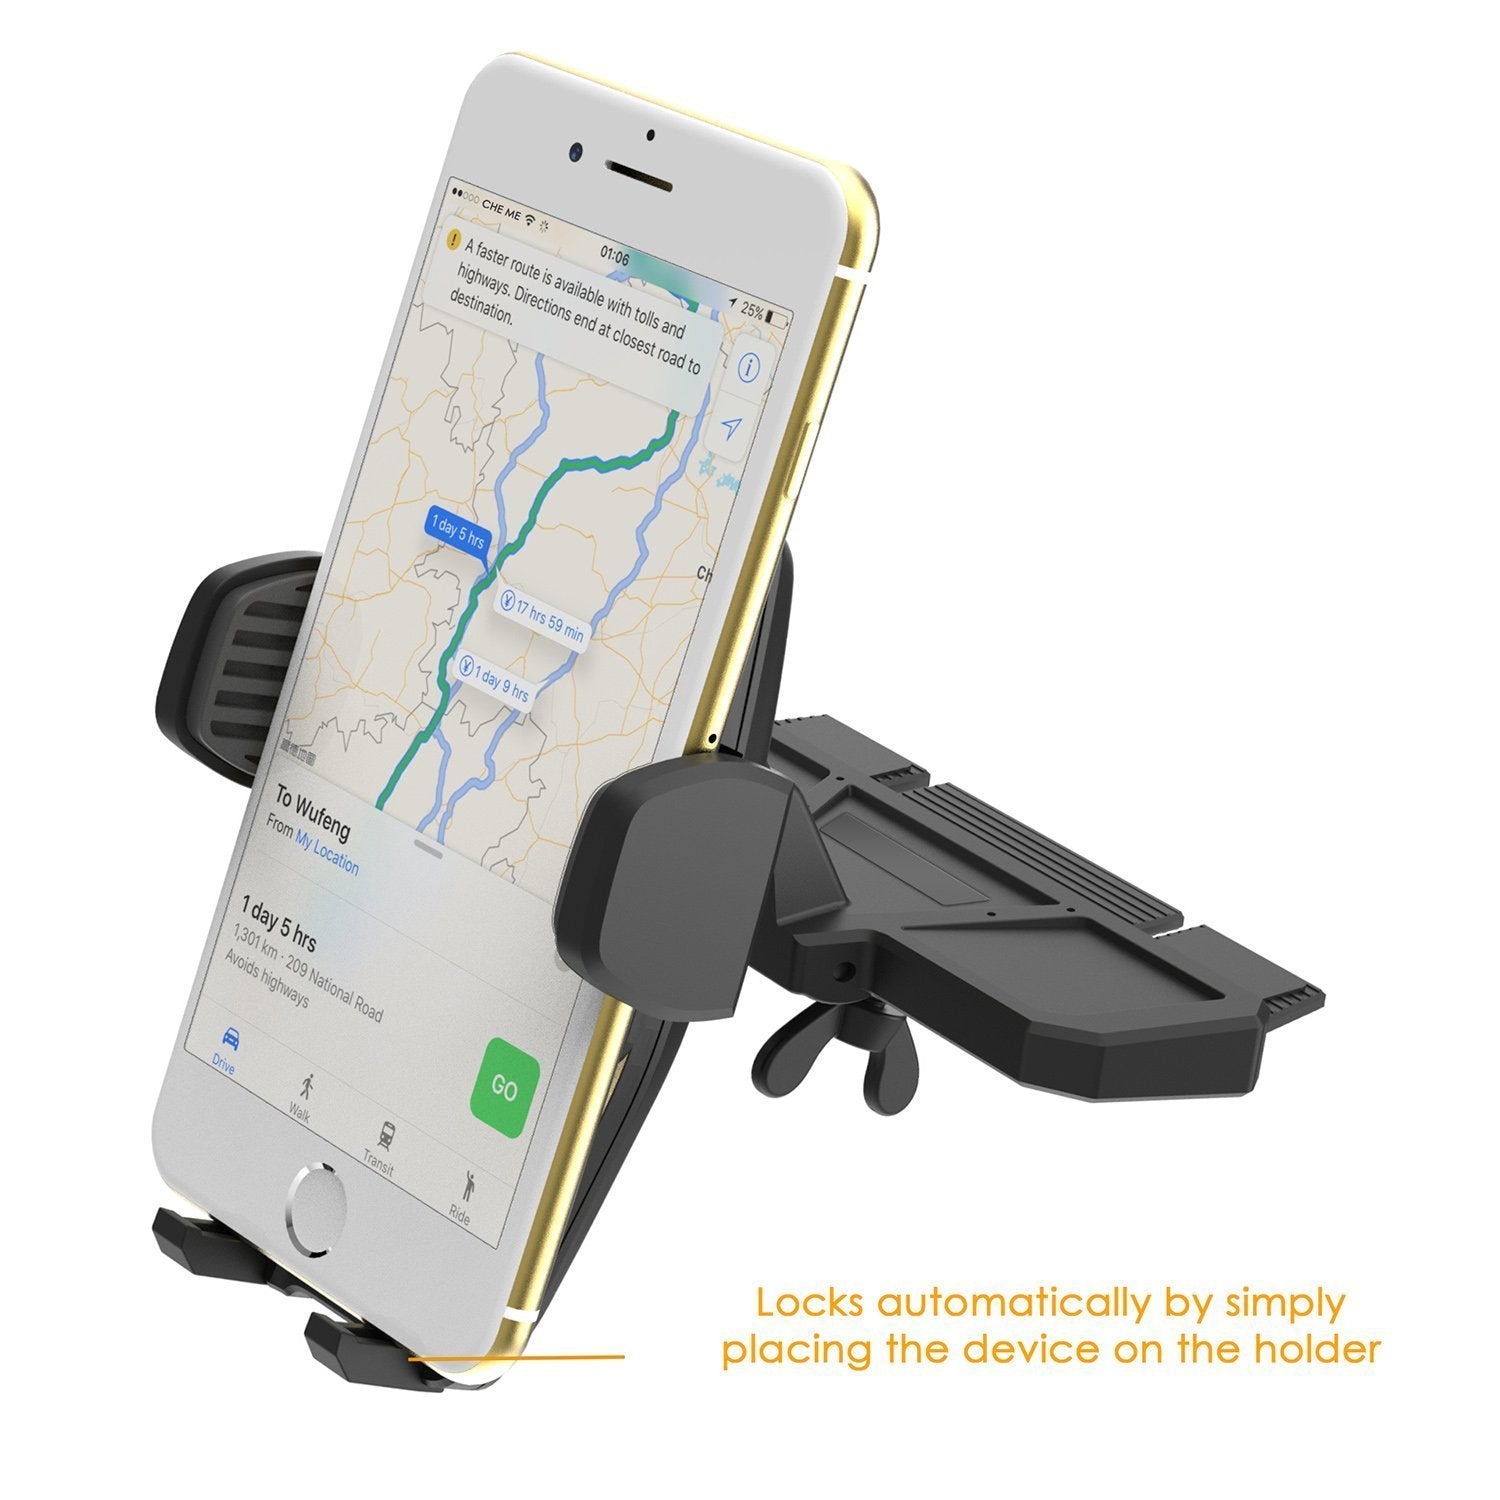 WixGear Universal Car Phone Mount CD Slot Car Mount Holder with New Gravity Self-Locking Design Mount, Compatible with All Phones (New Self-Locking)